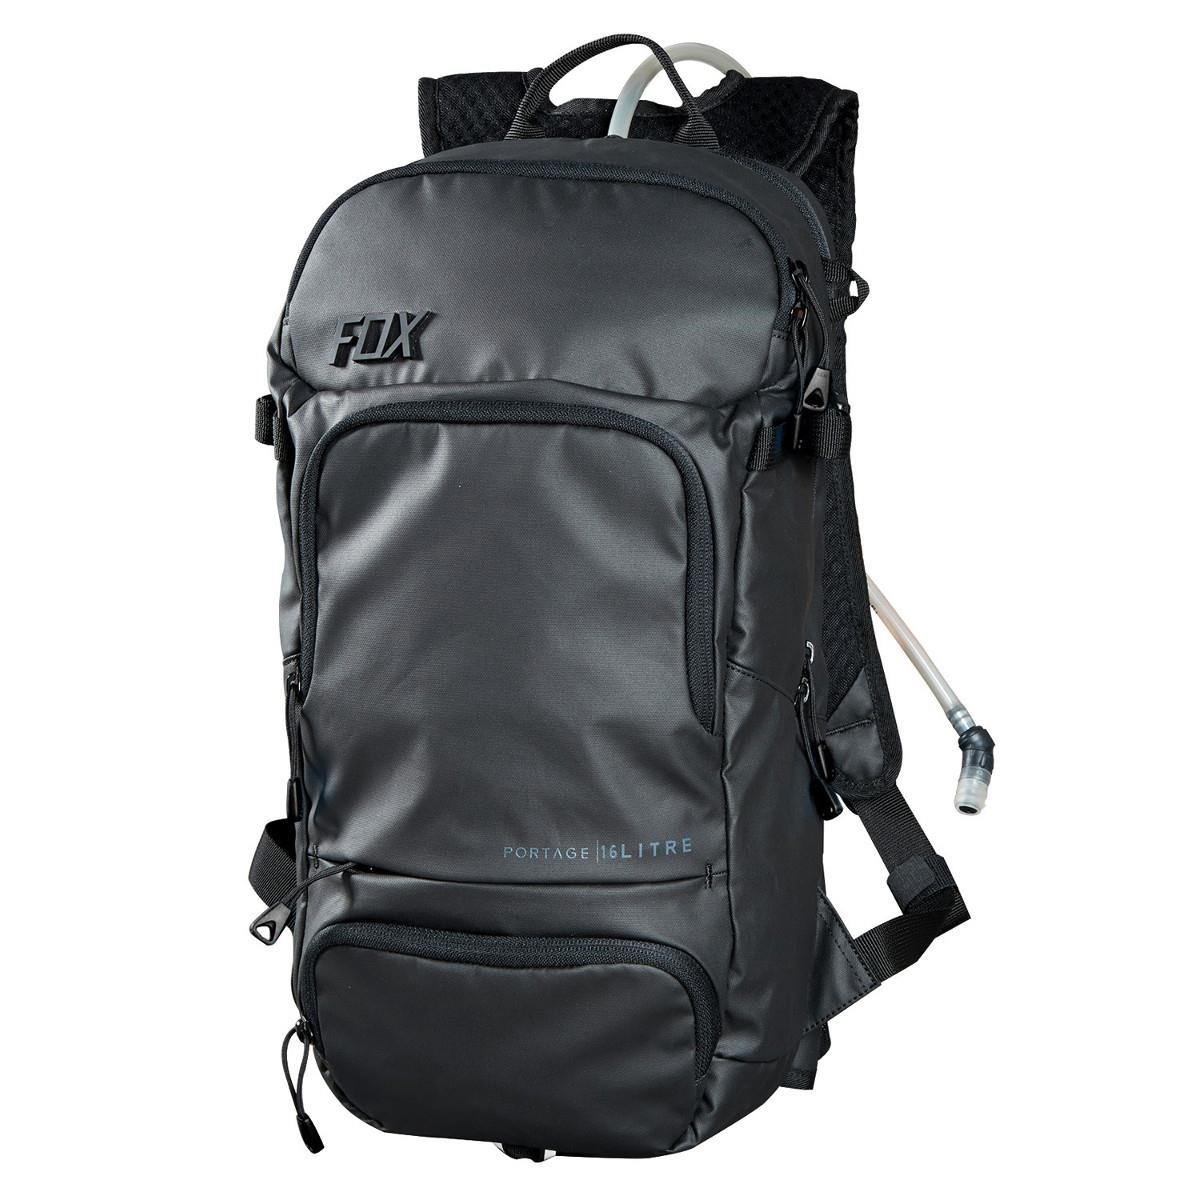 Fox Backpack with Hydration System Compartment Portage Black